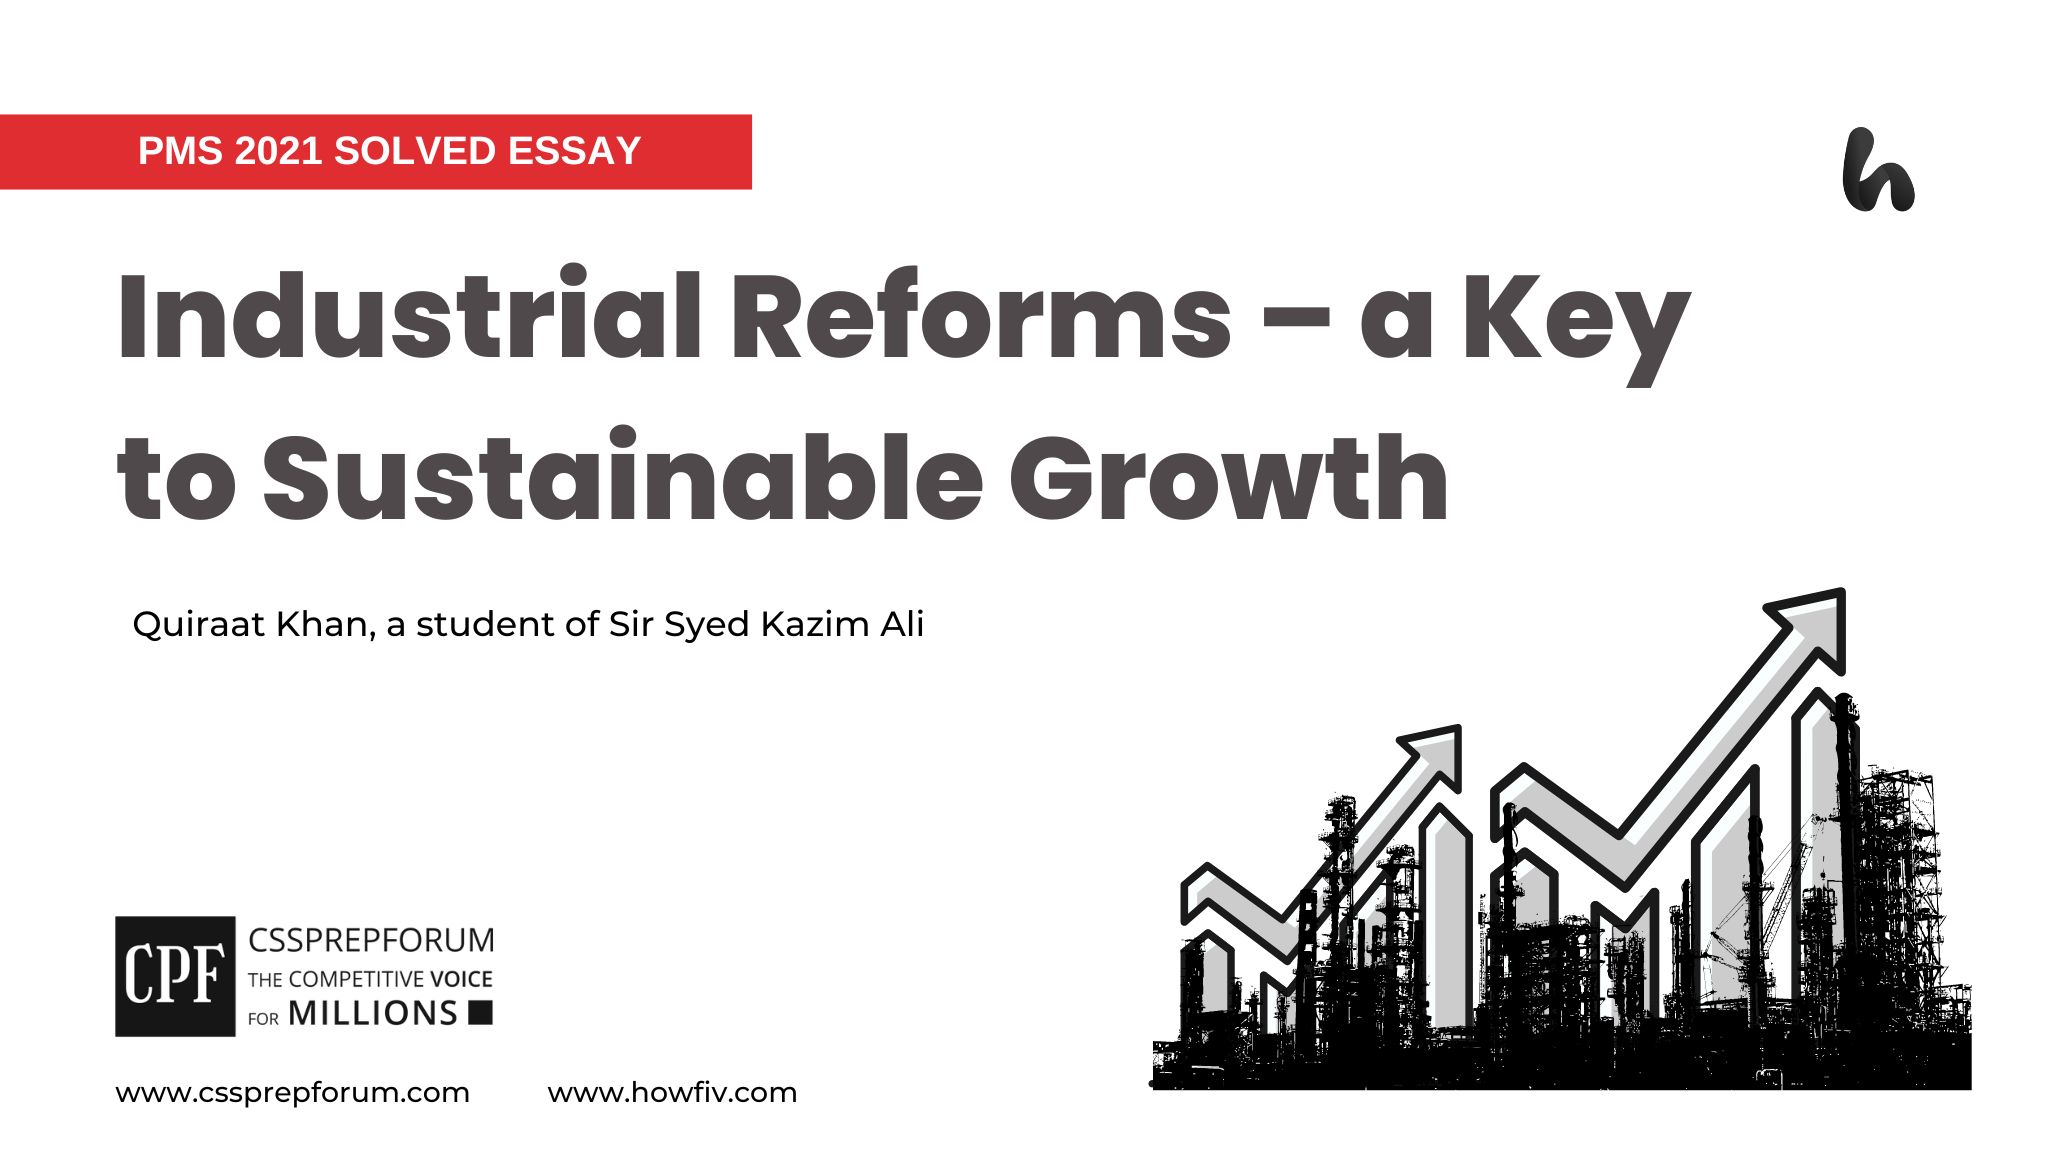 Industrial Reforms – a Key to Sustainable Growth by Quiraat Khan